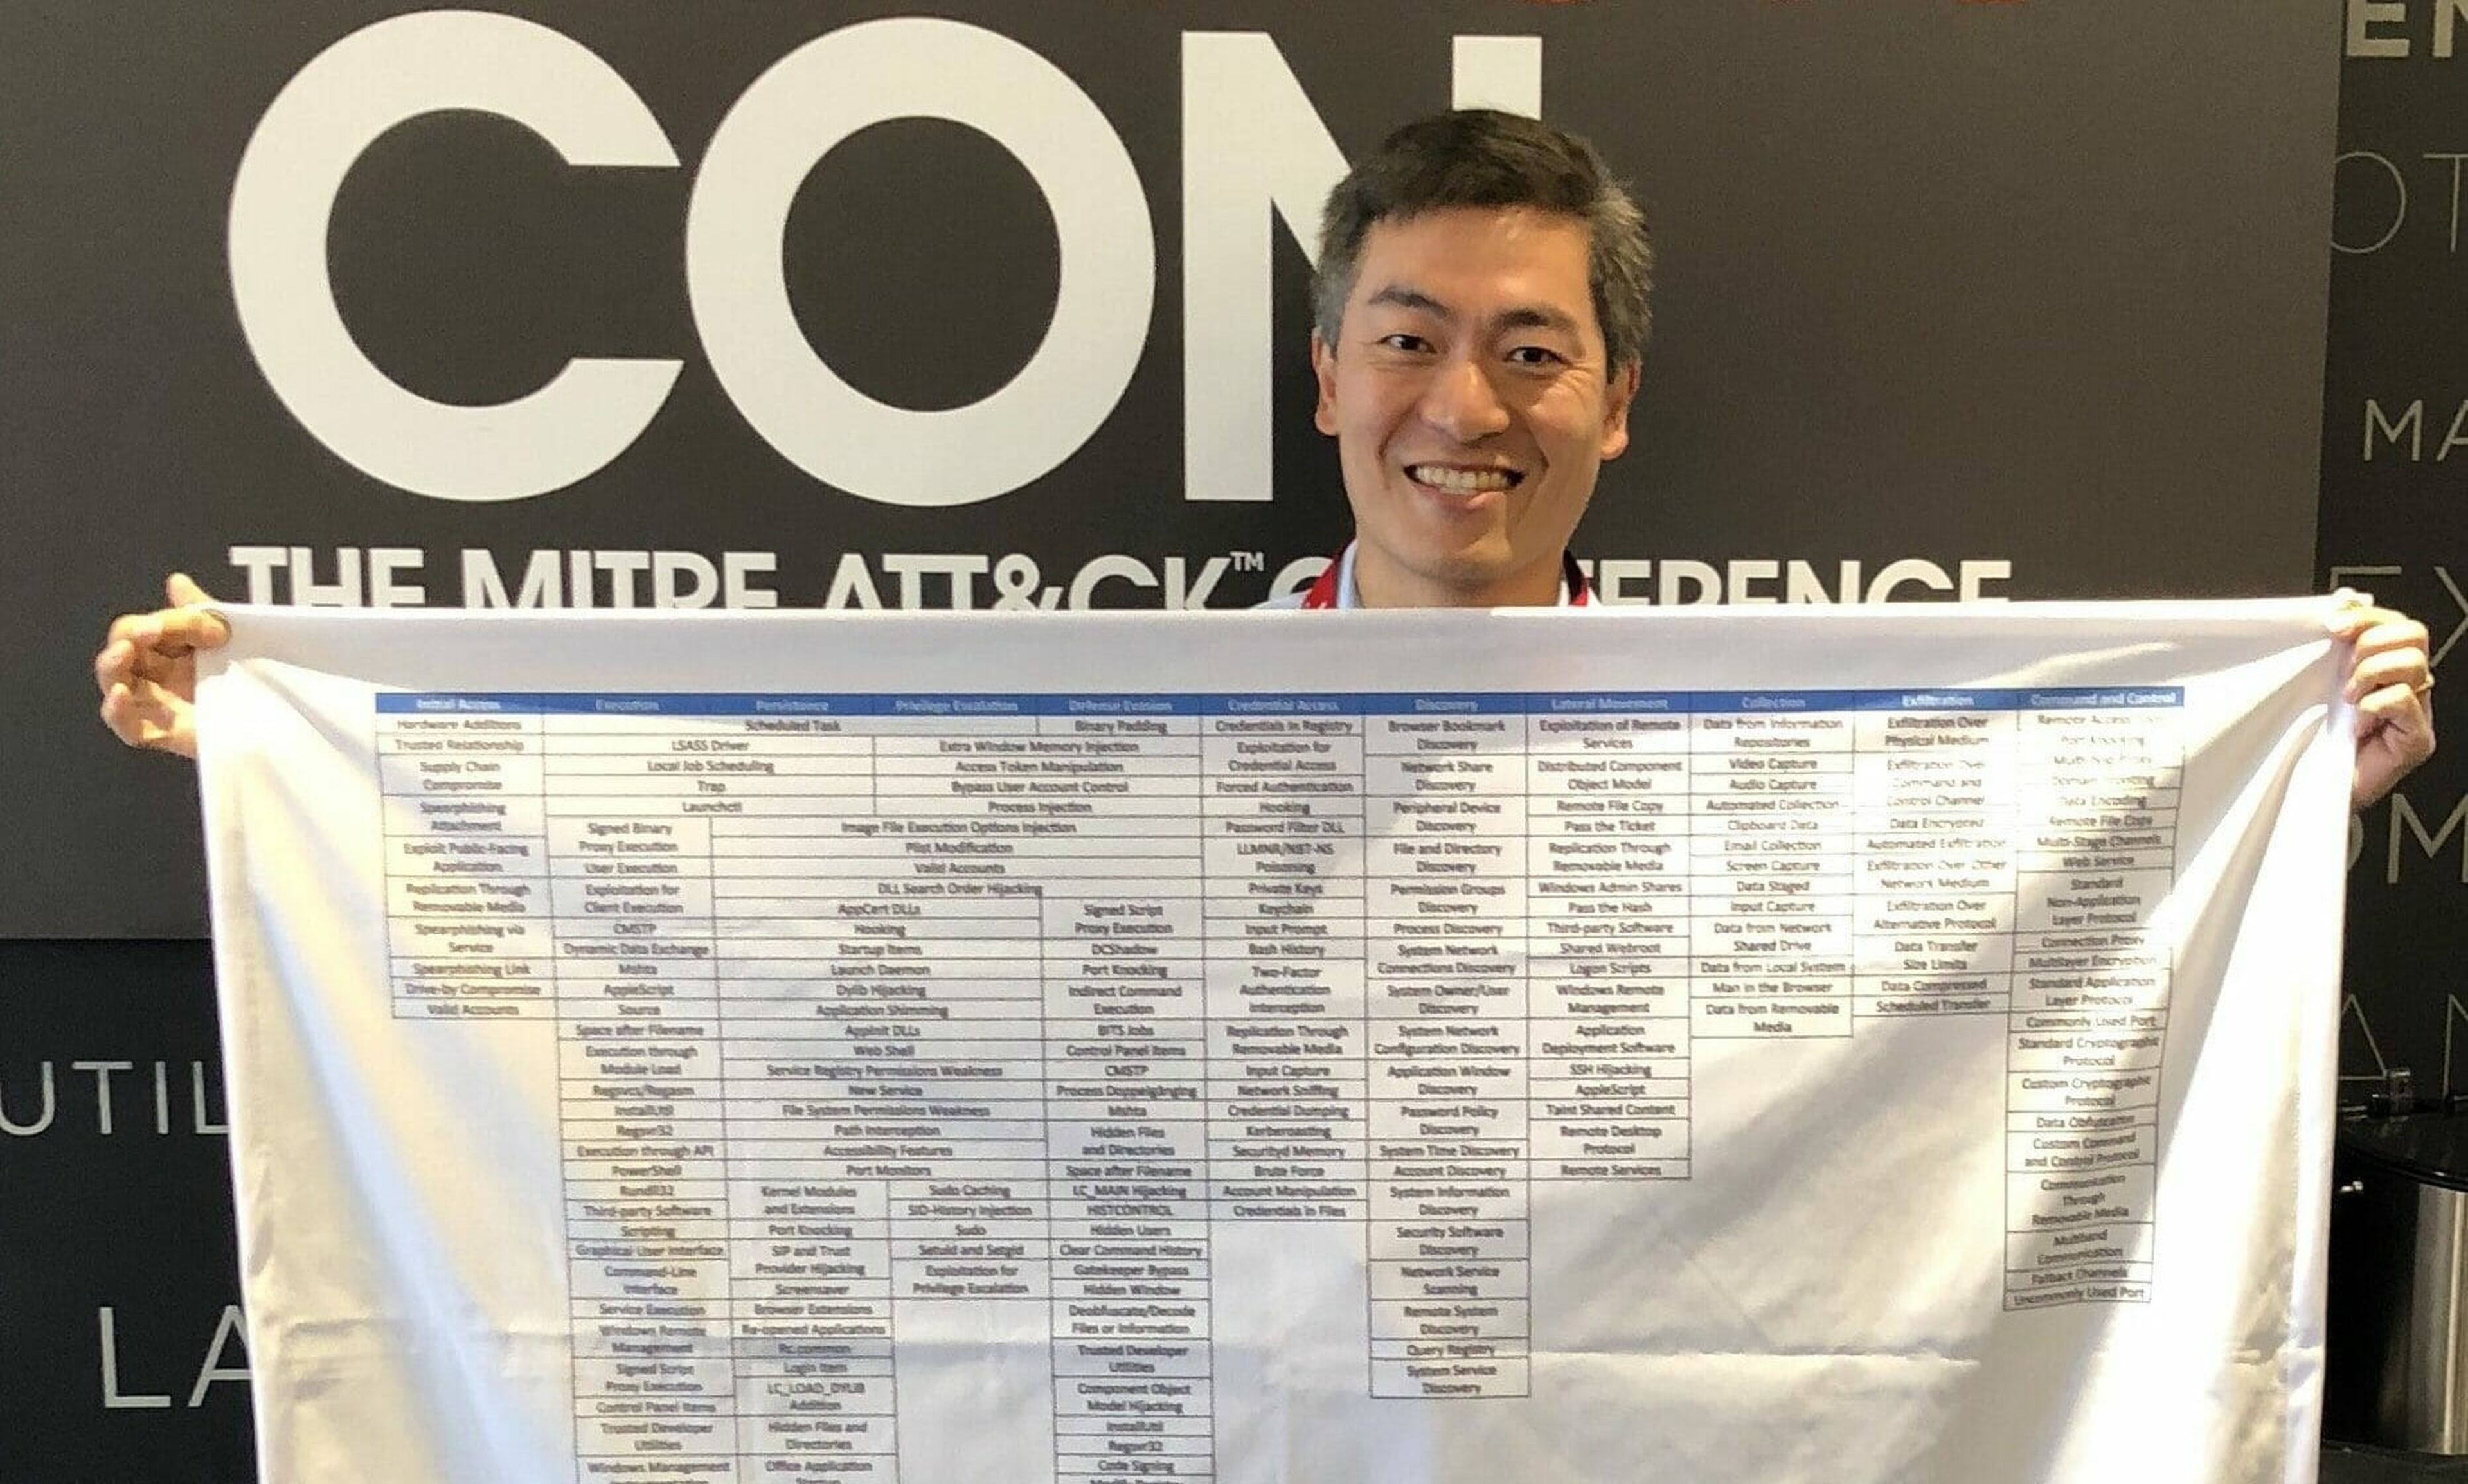 Sounil Yu at the Mitre ATT&#038;CK Conference, holding up a a life size poster of the Mitre ATT&#038;CK framework.